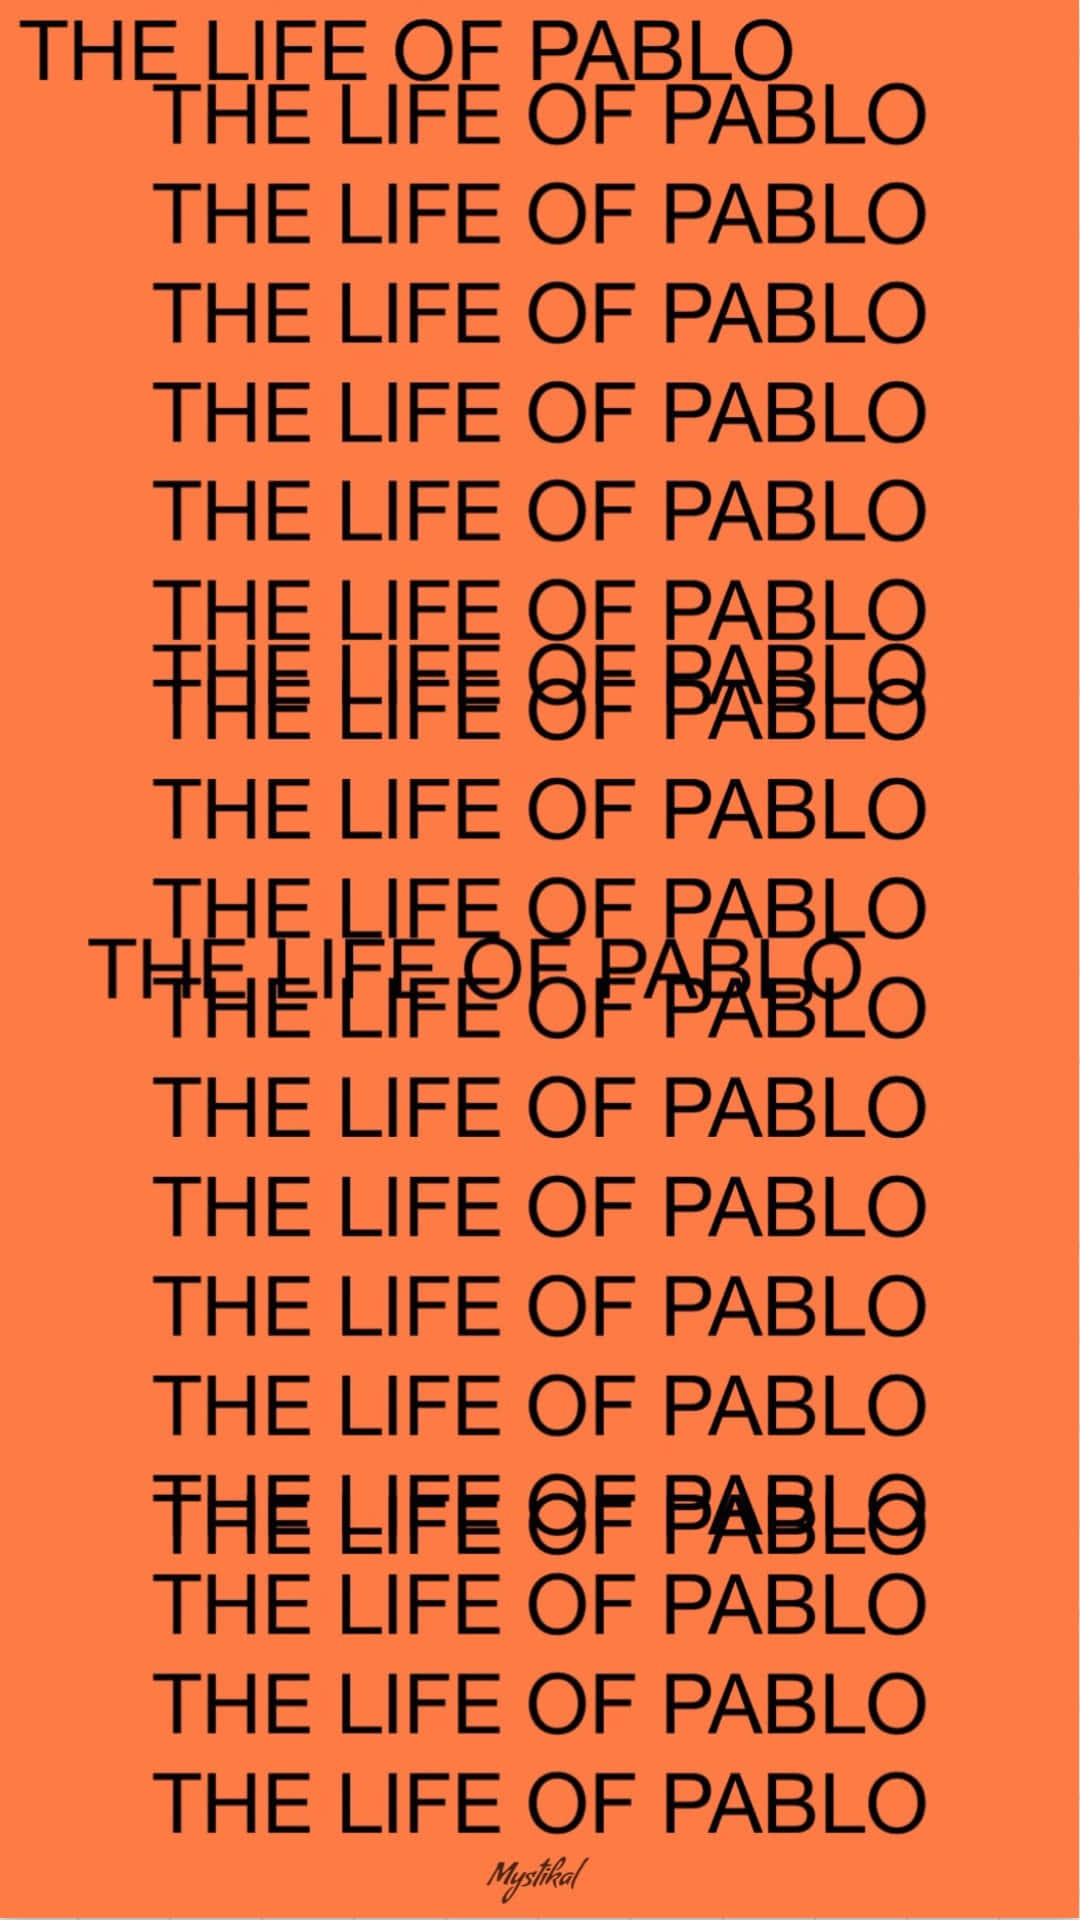 A glimpse into the 'The Life of Pablo' Wallpaper